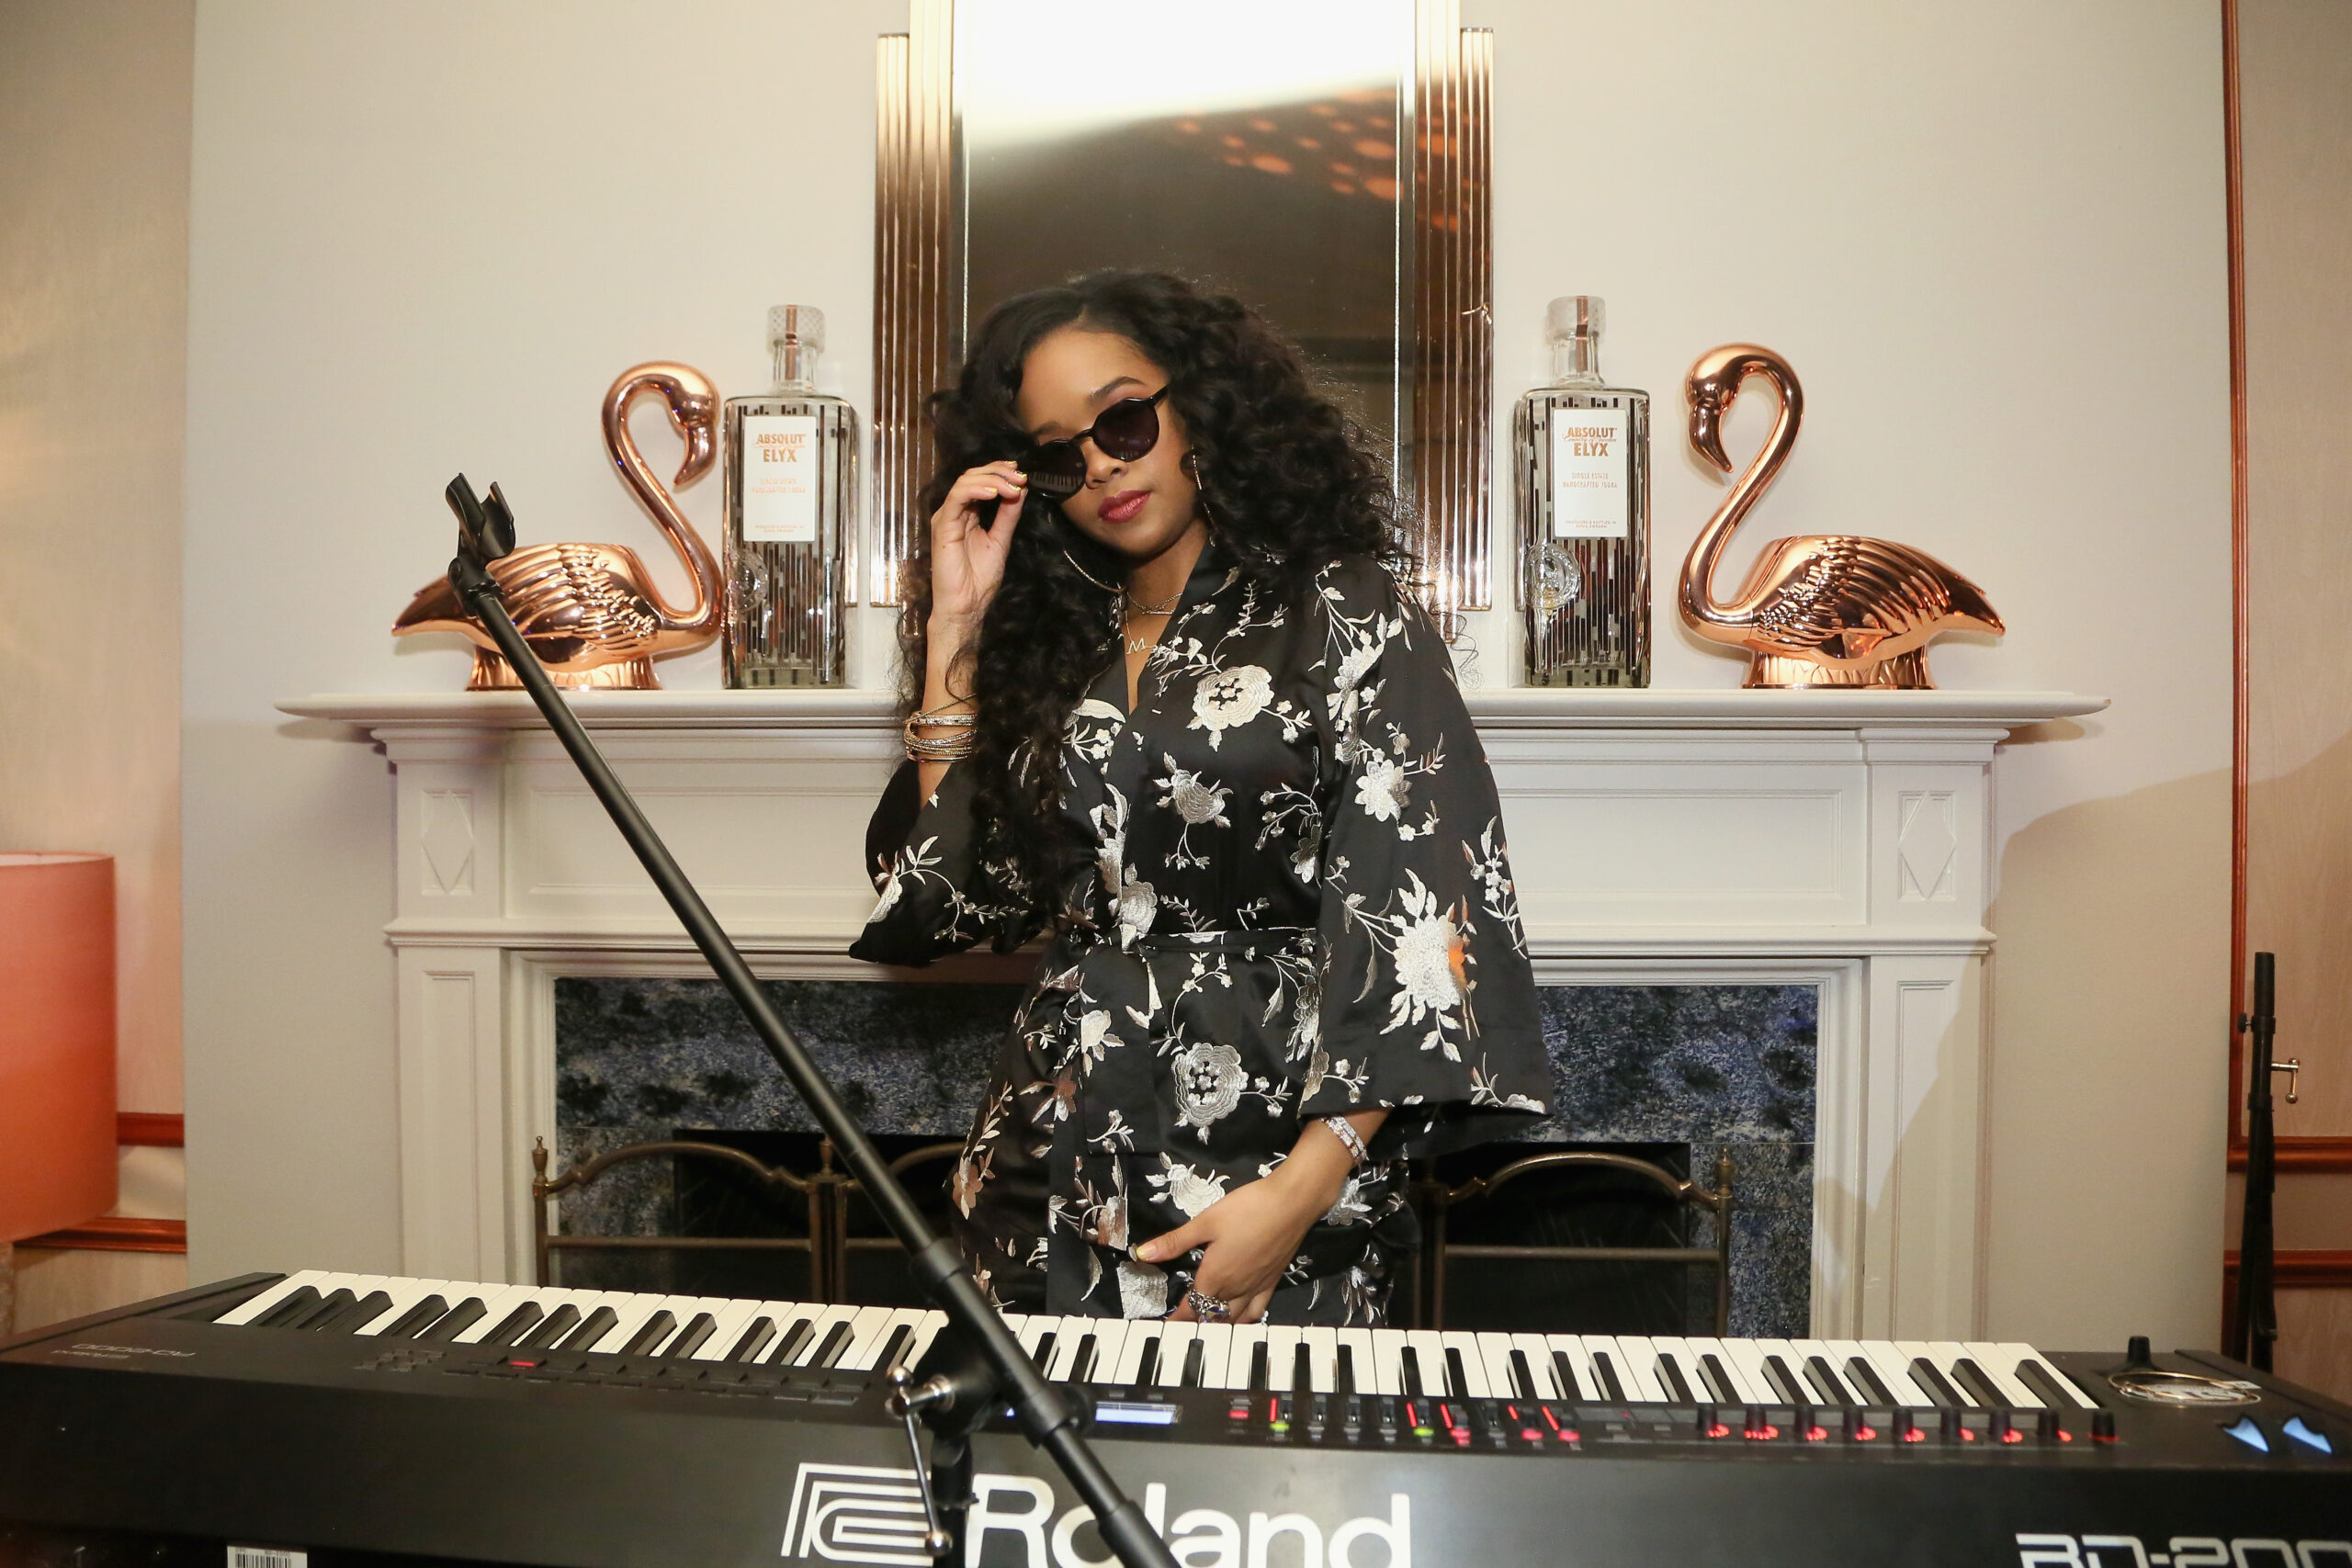 BASIC Magazine & H.E.R. Pre-Grammy Party with Absolut Elyx